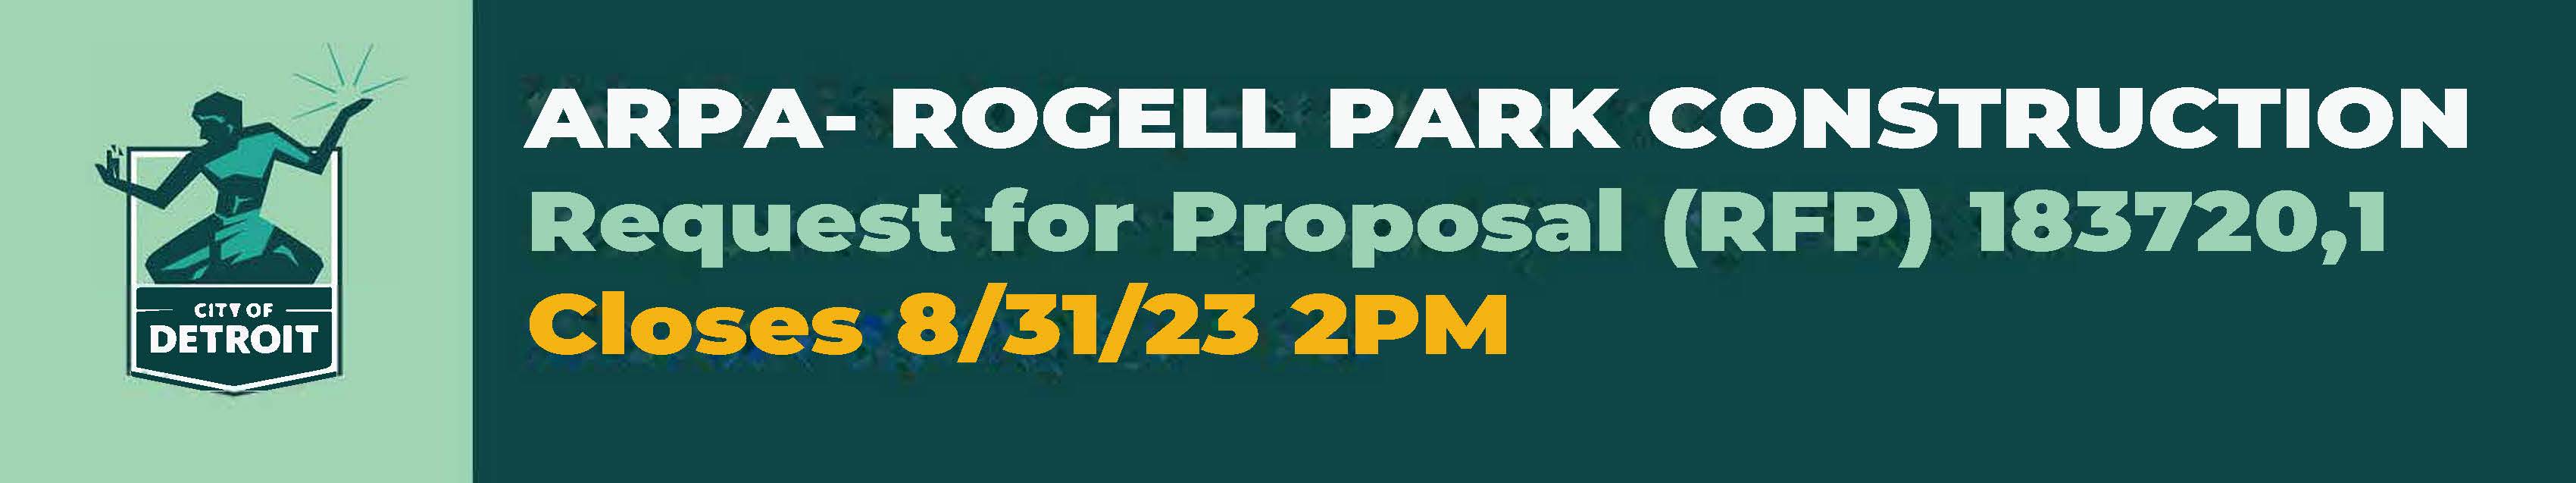 Take Part: ARPA -ROGELL PARK CONSTRUCTION